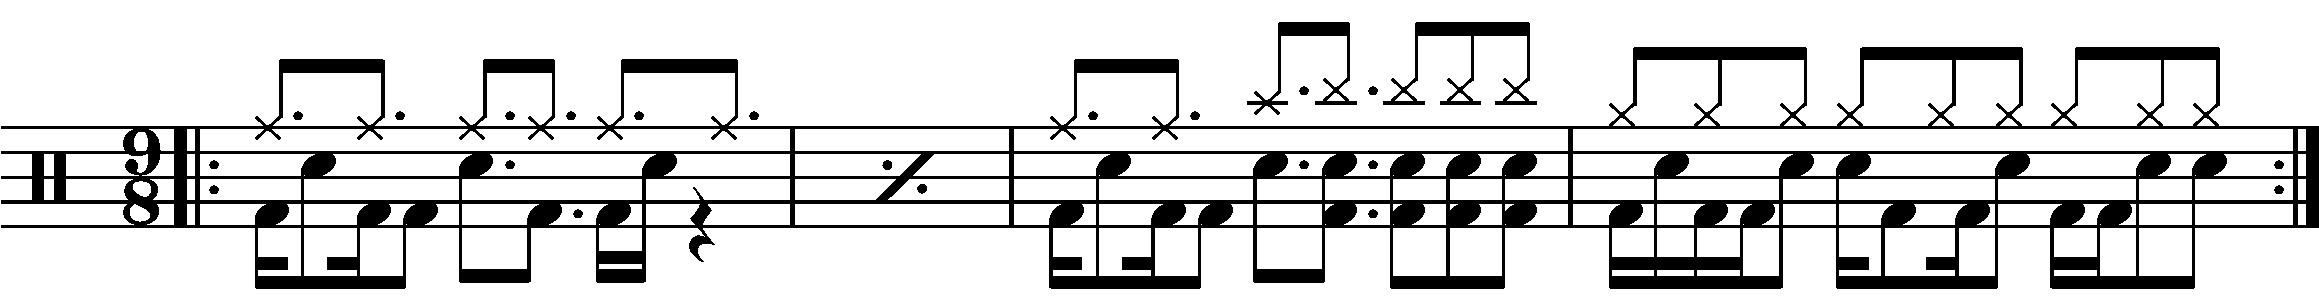 A four bar phrase in 9/8 based around a dotted eighth back beat